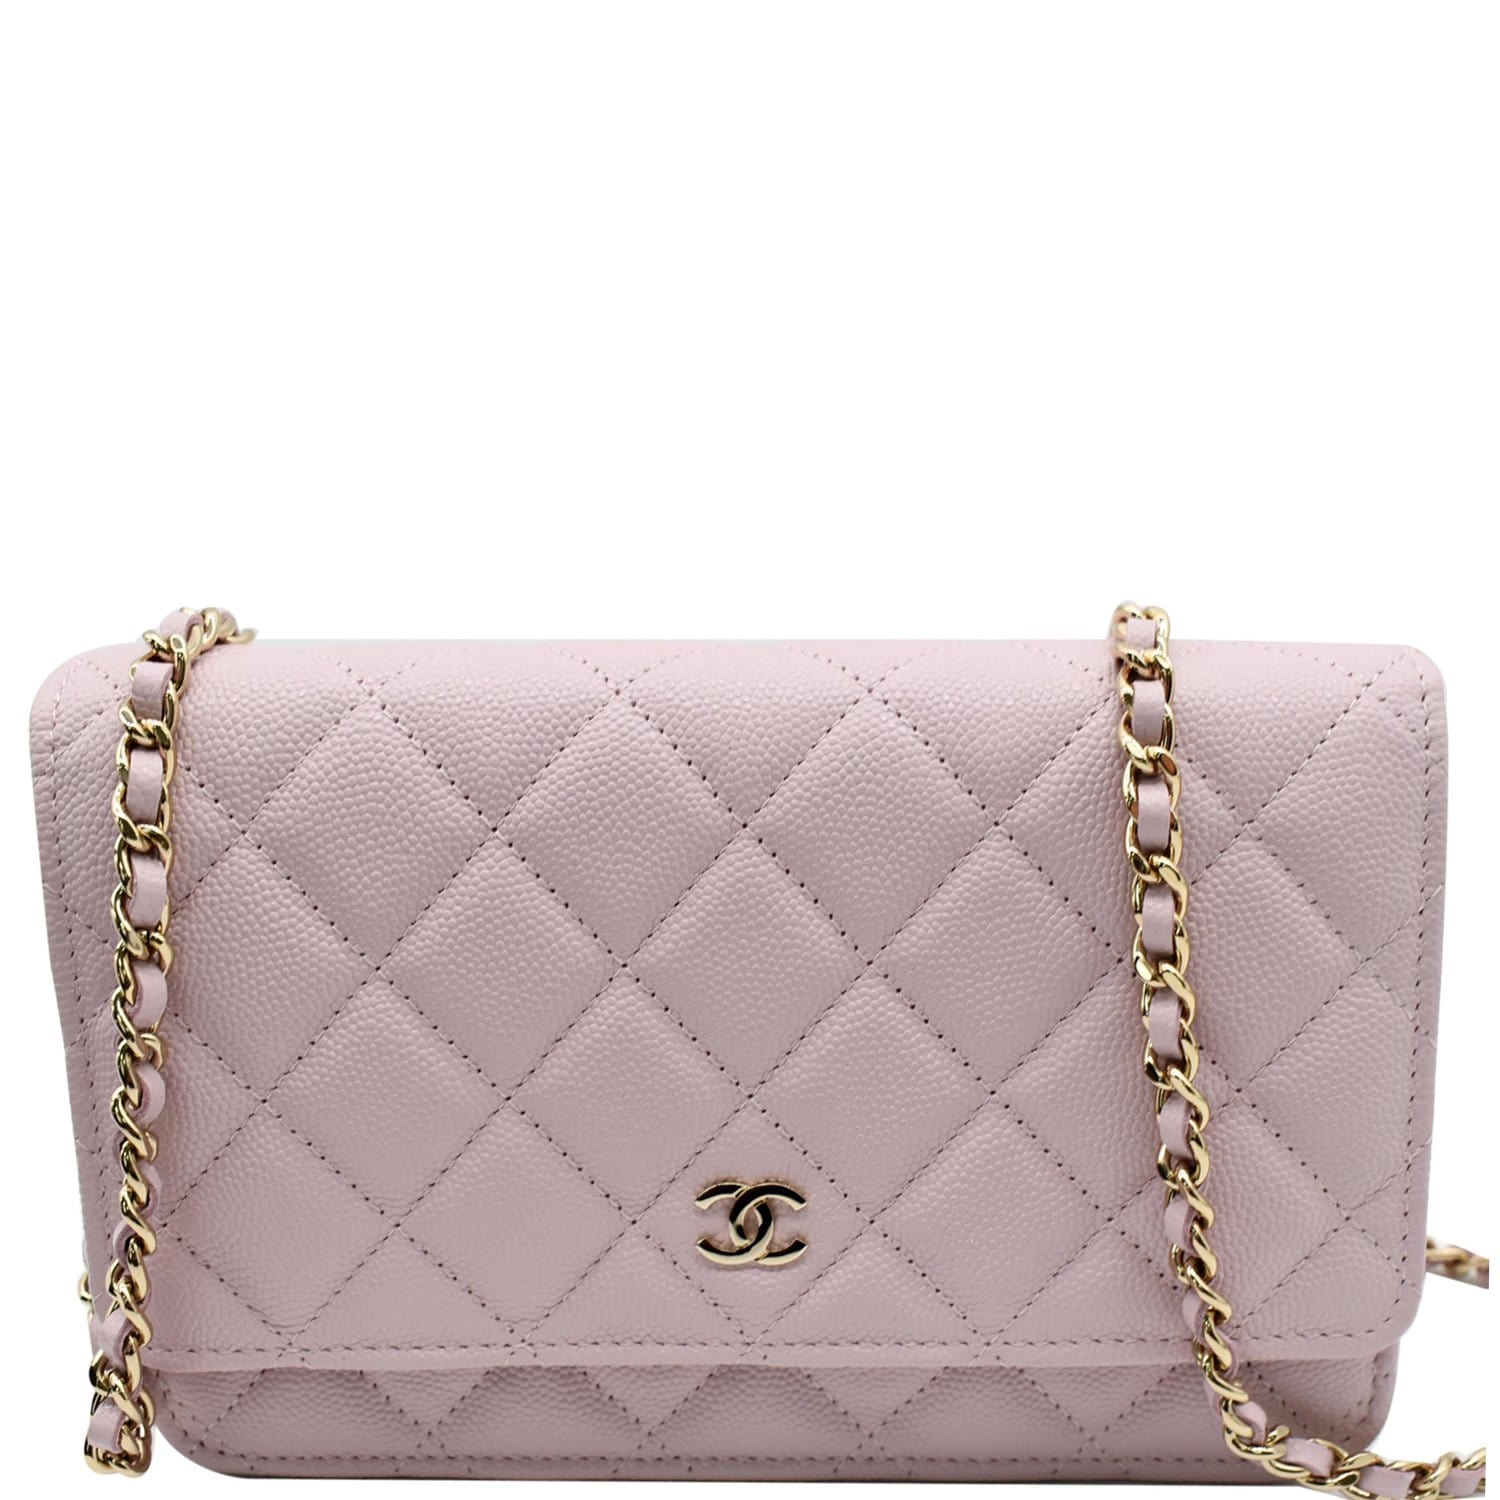 Chanel Rare Hot Pink Caviar Wallet on Chain (WOC) – Classic Coco